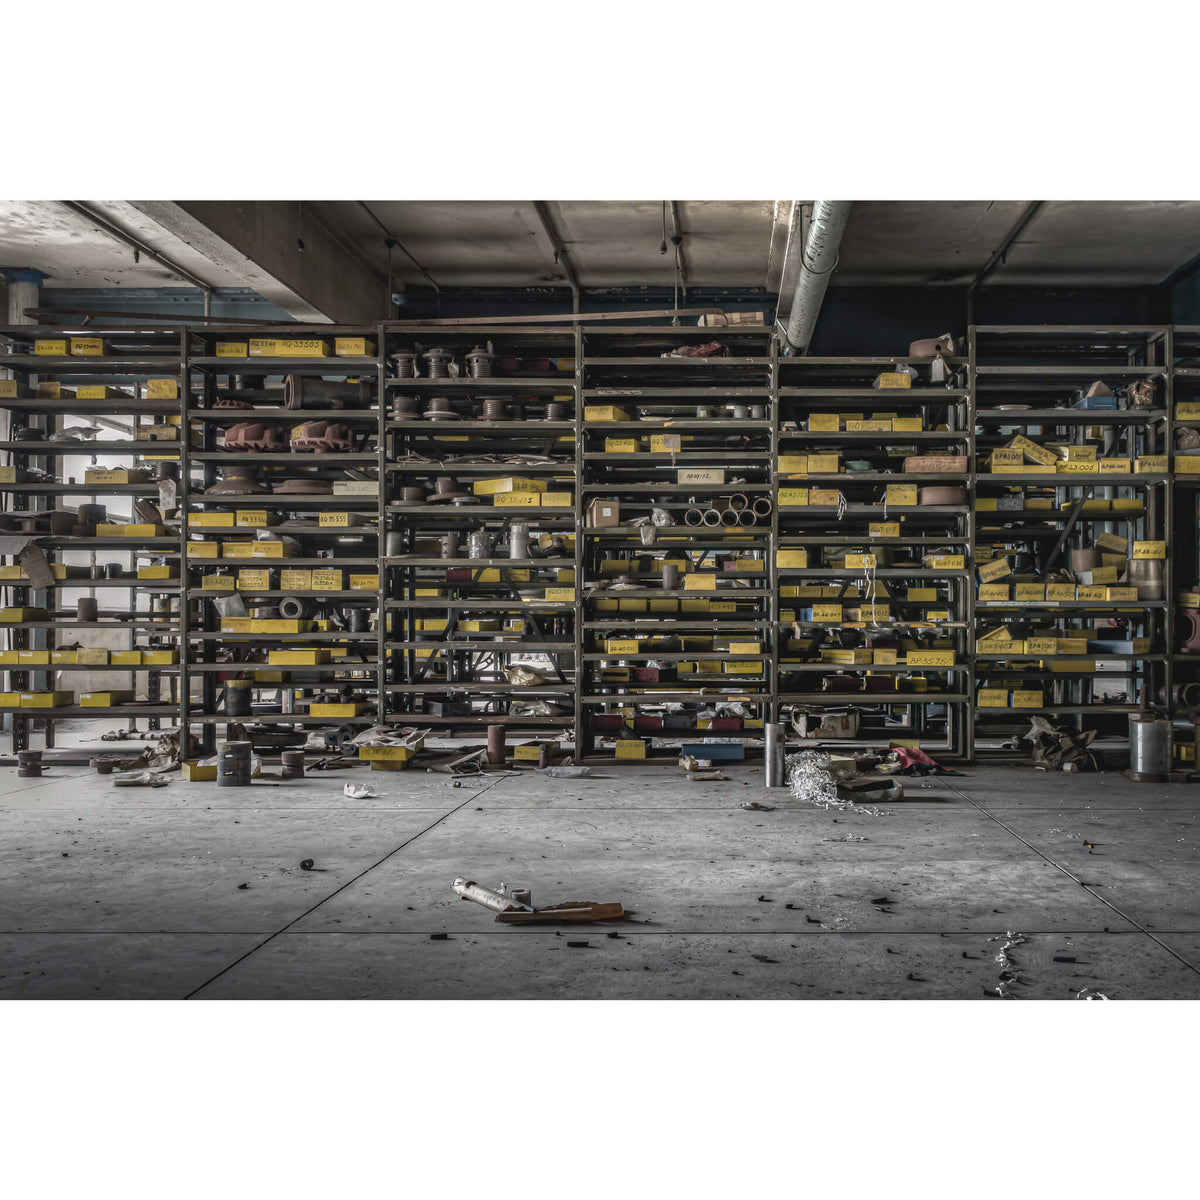 A Mechanical Store | Wangi Power Station Fine Art Print - Lost Collective Shop